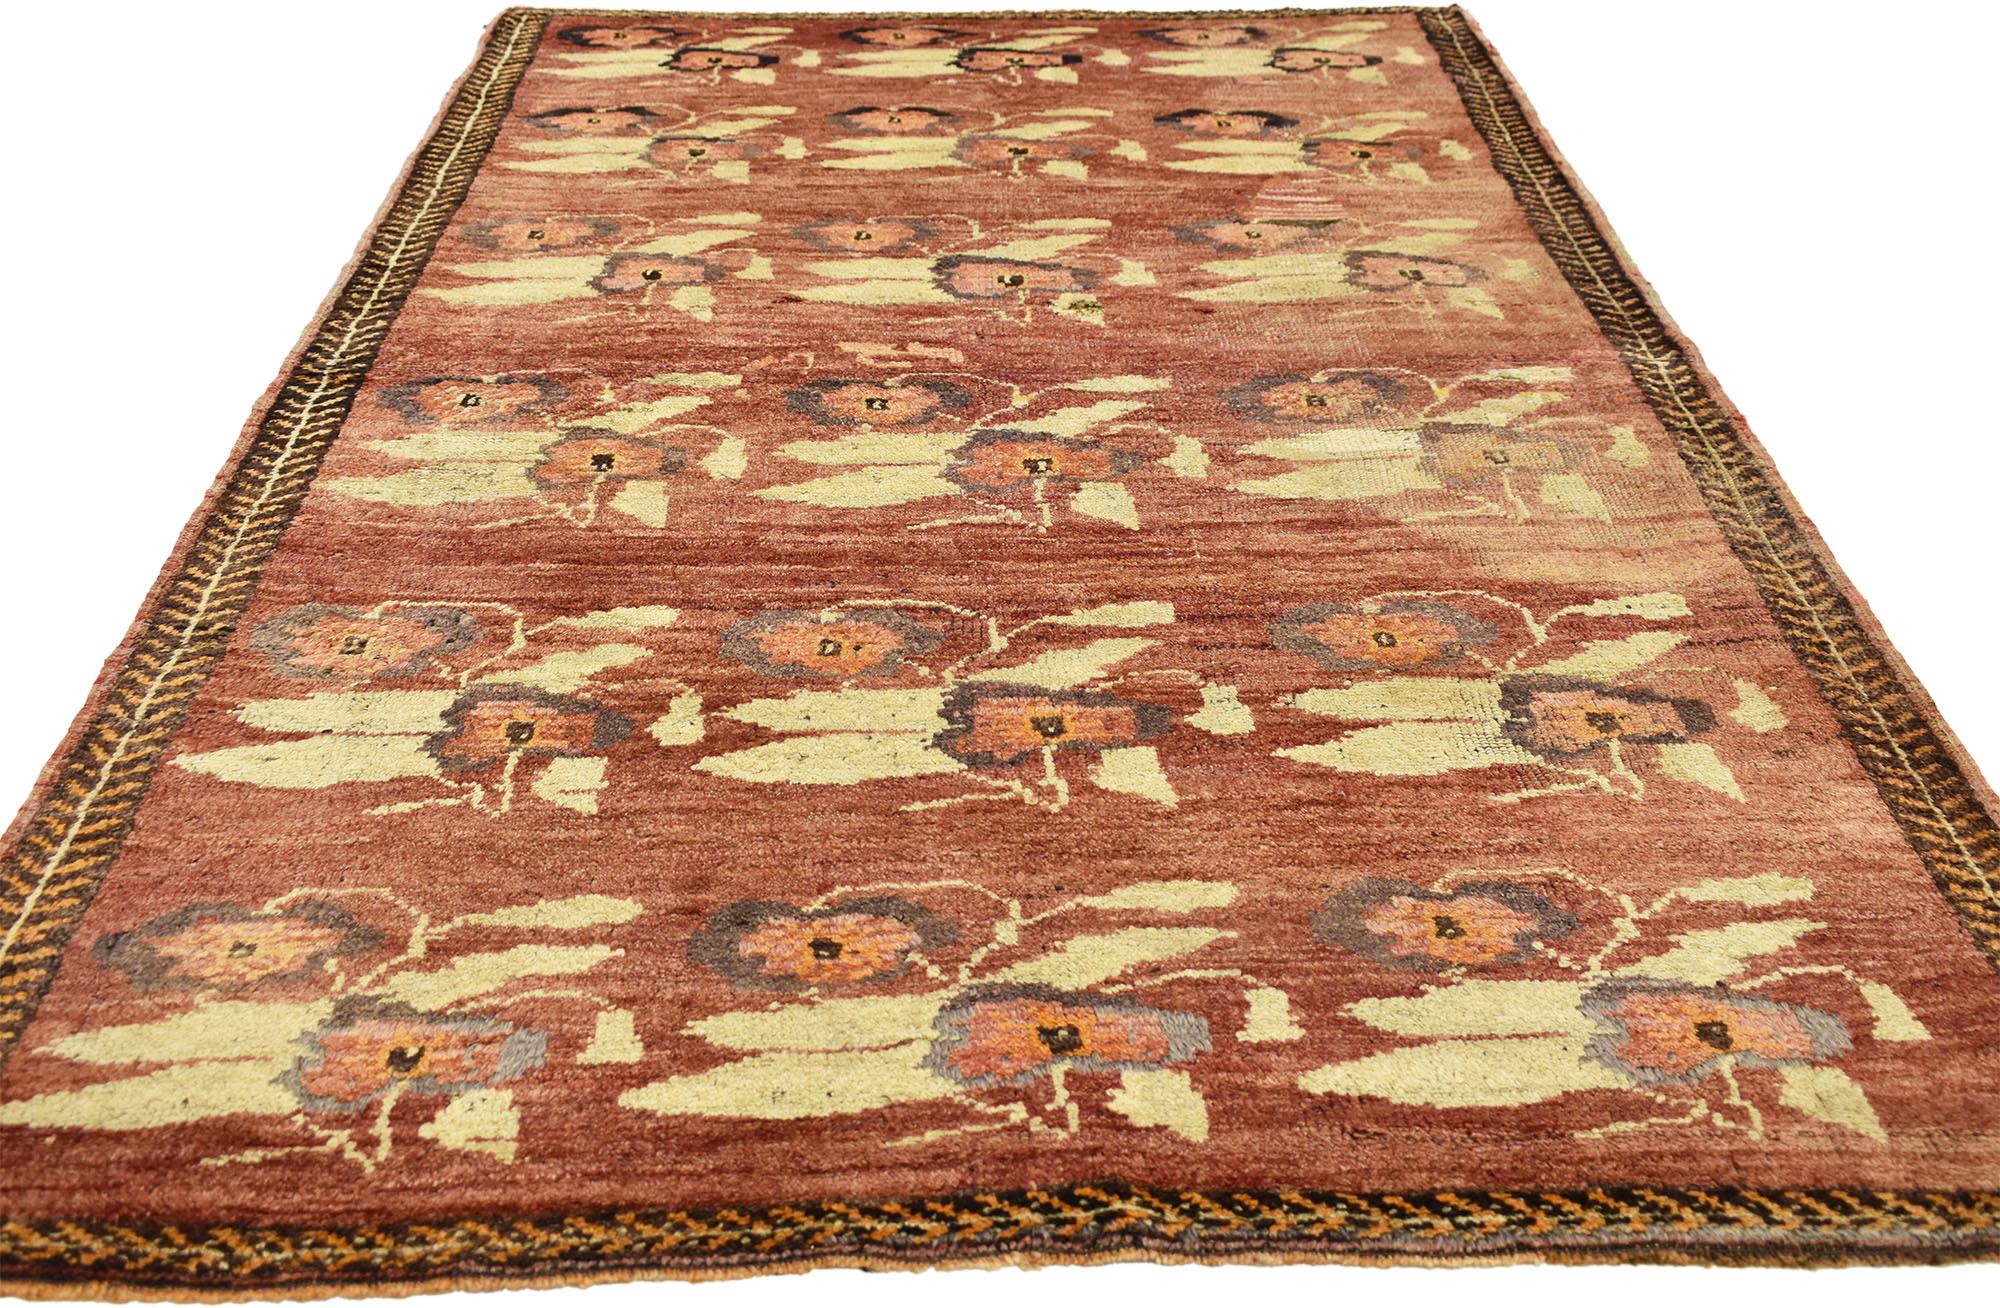 Vintage Turkish Oushak Rug with Rustic Earth-Tone Colors In Good Condition For Sale In Dallas, TX